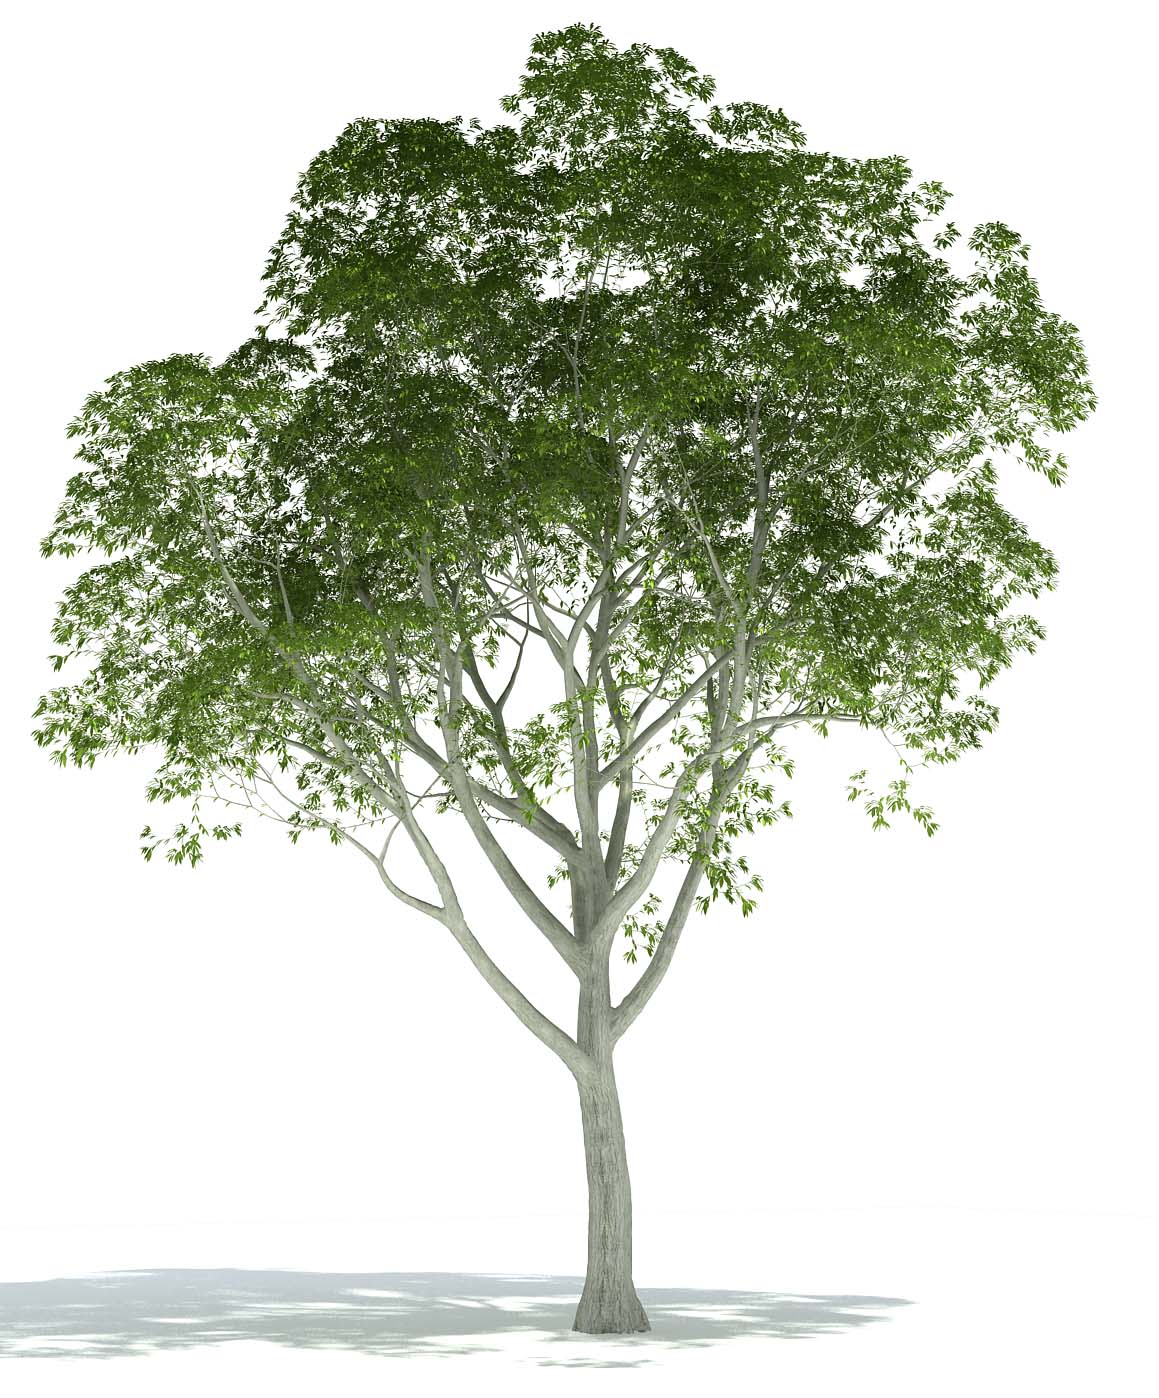 Photoshop Architectural Tree